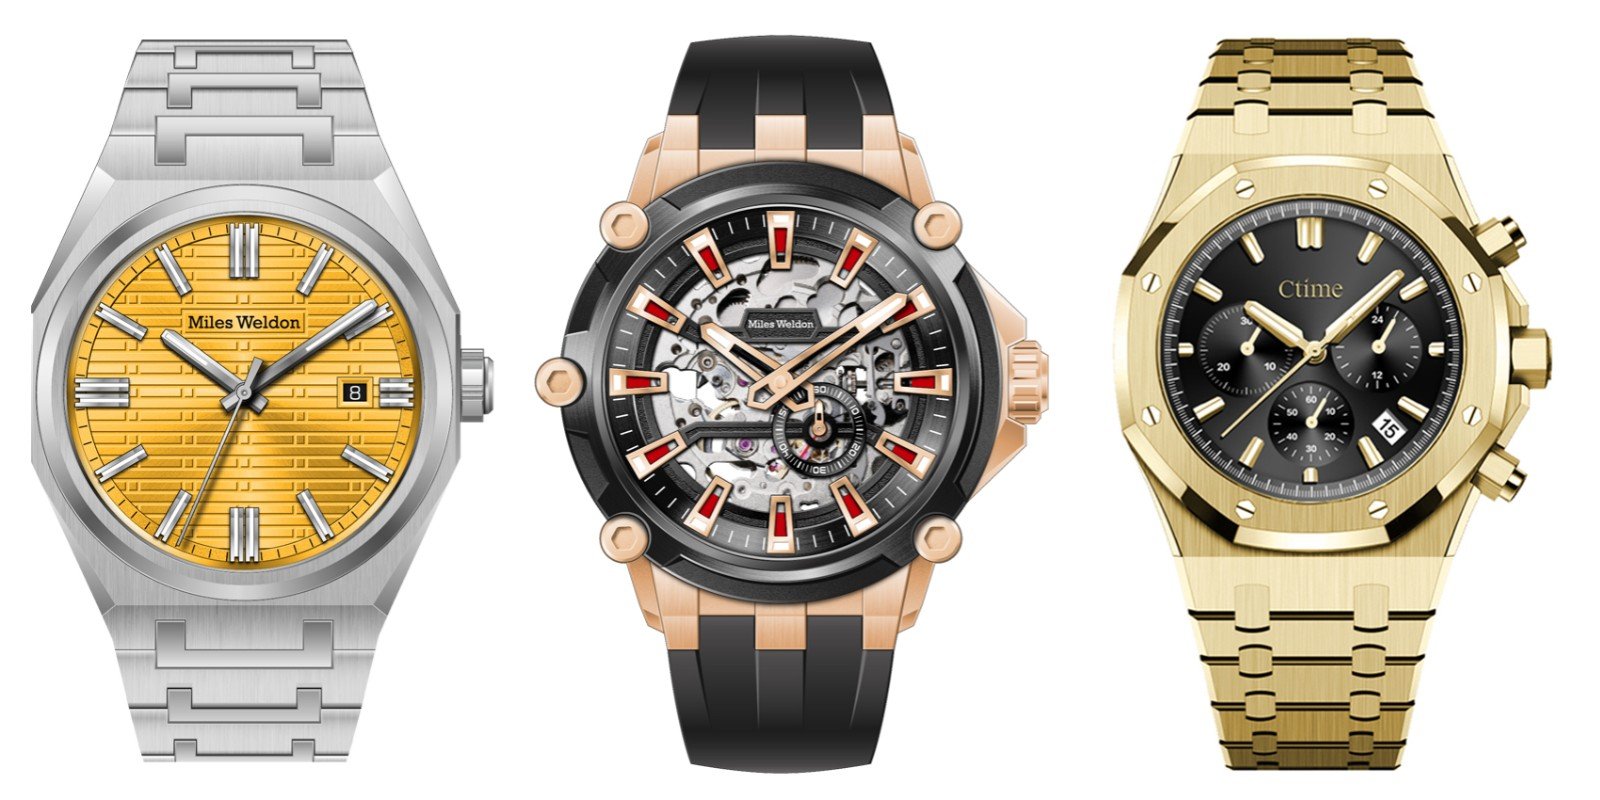 Top 10 Chinese Watch Manufacturers | Ctime Watches